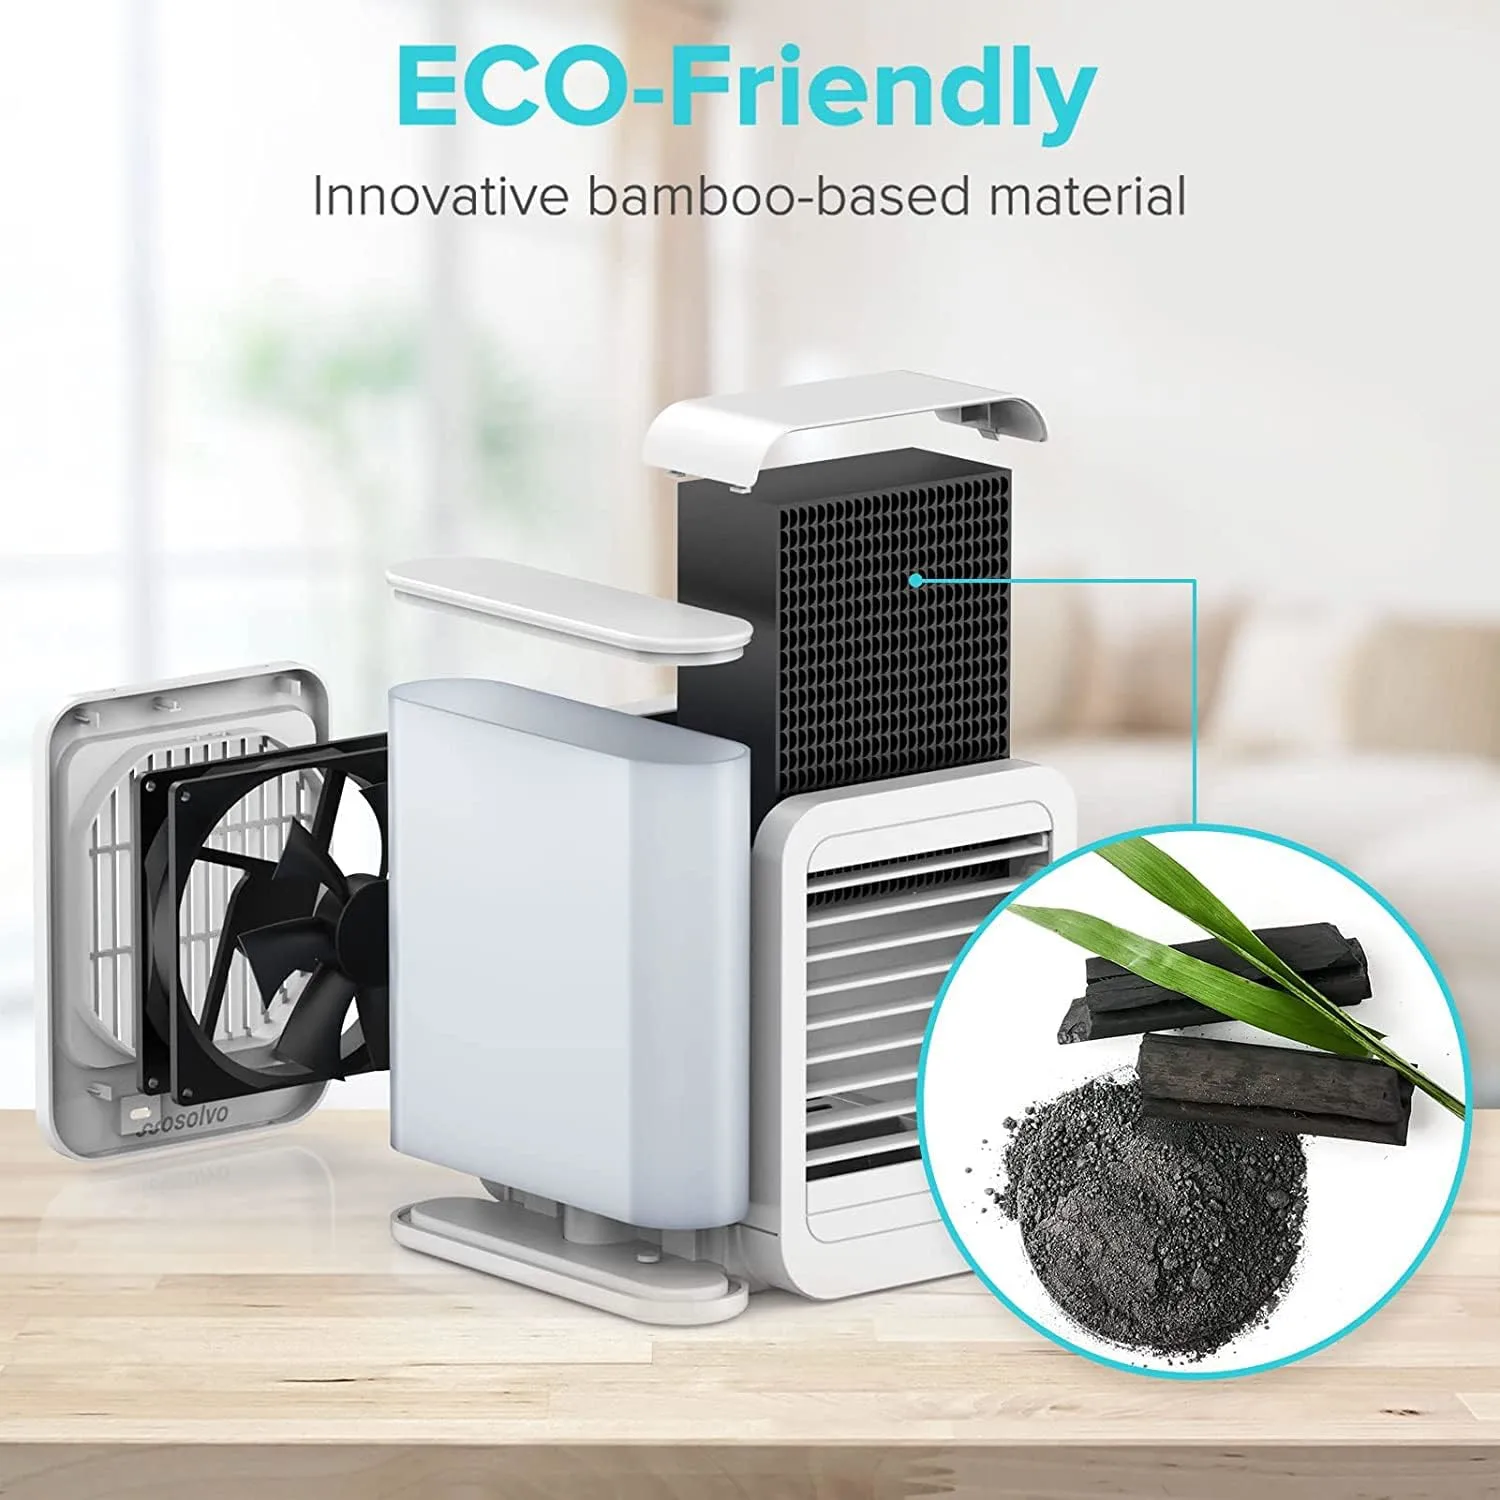 Portable Air Conditioners Fan: 1000ml Evaporative Mini Air Cooler with 3 Speeds, 7 LED Light, Personal Air Cooler Desktop Cooling Fan, Air Conditioner Portable AC Unit for Home Room Office Desk